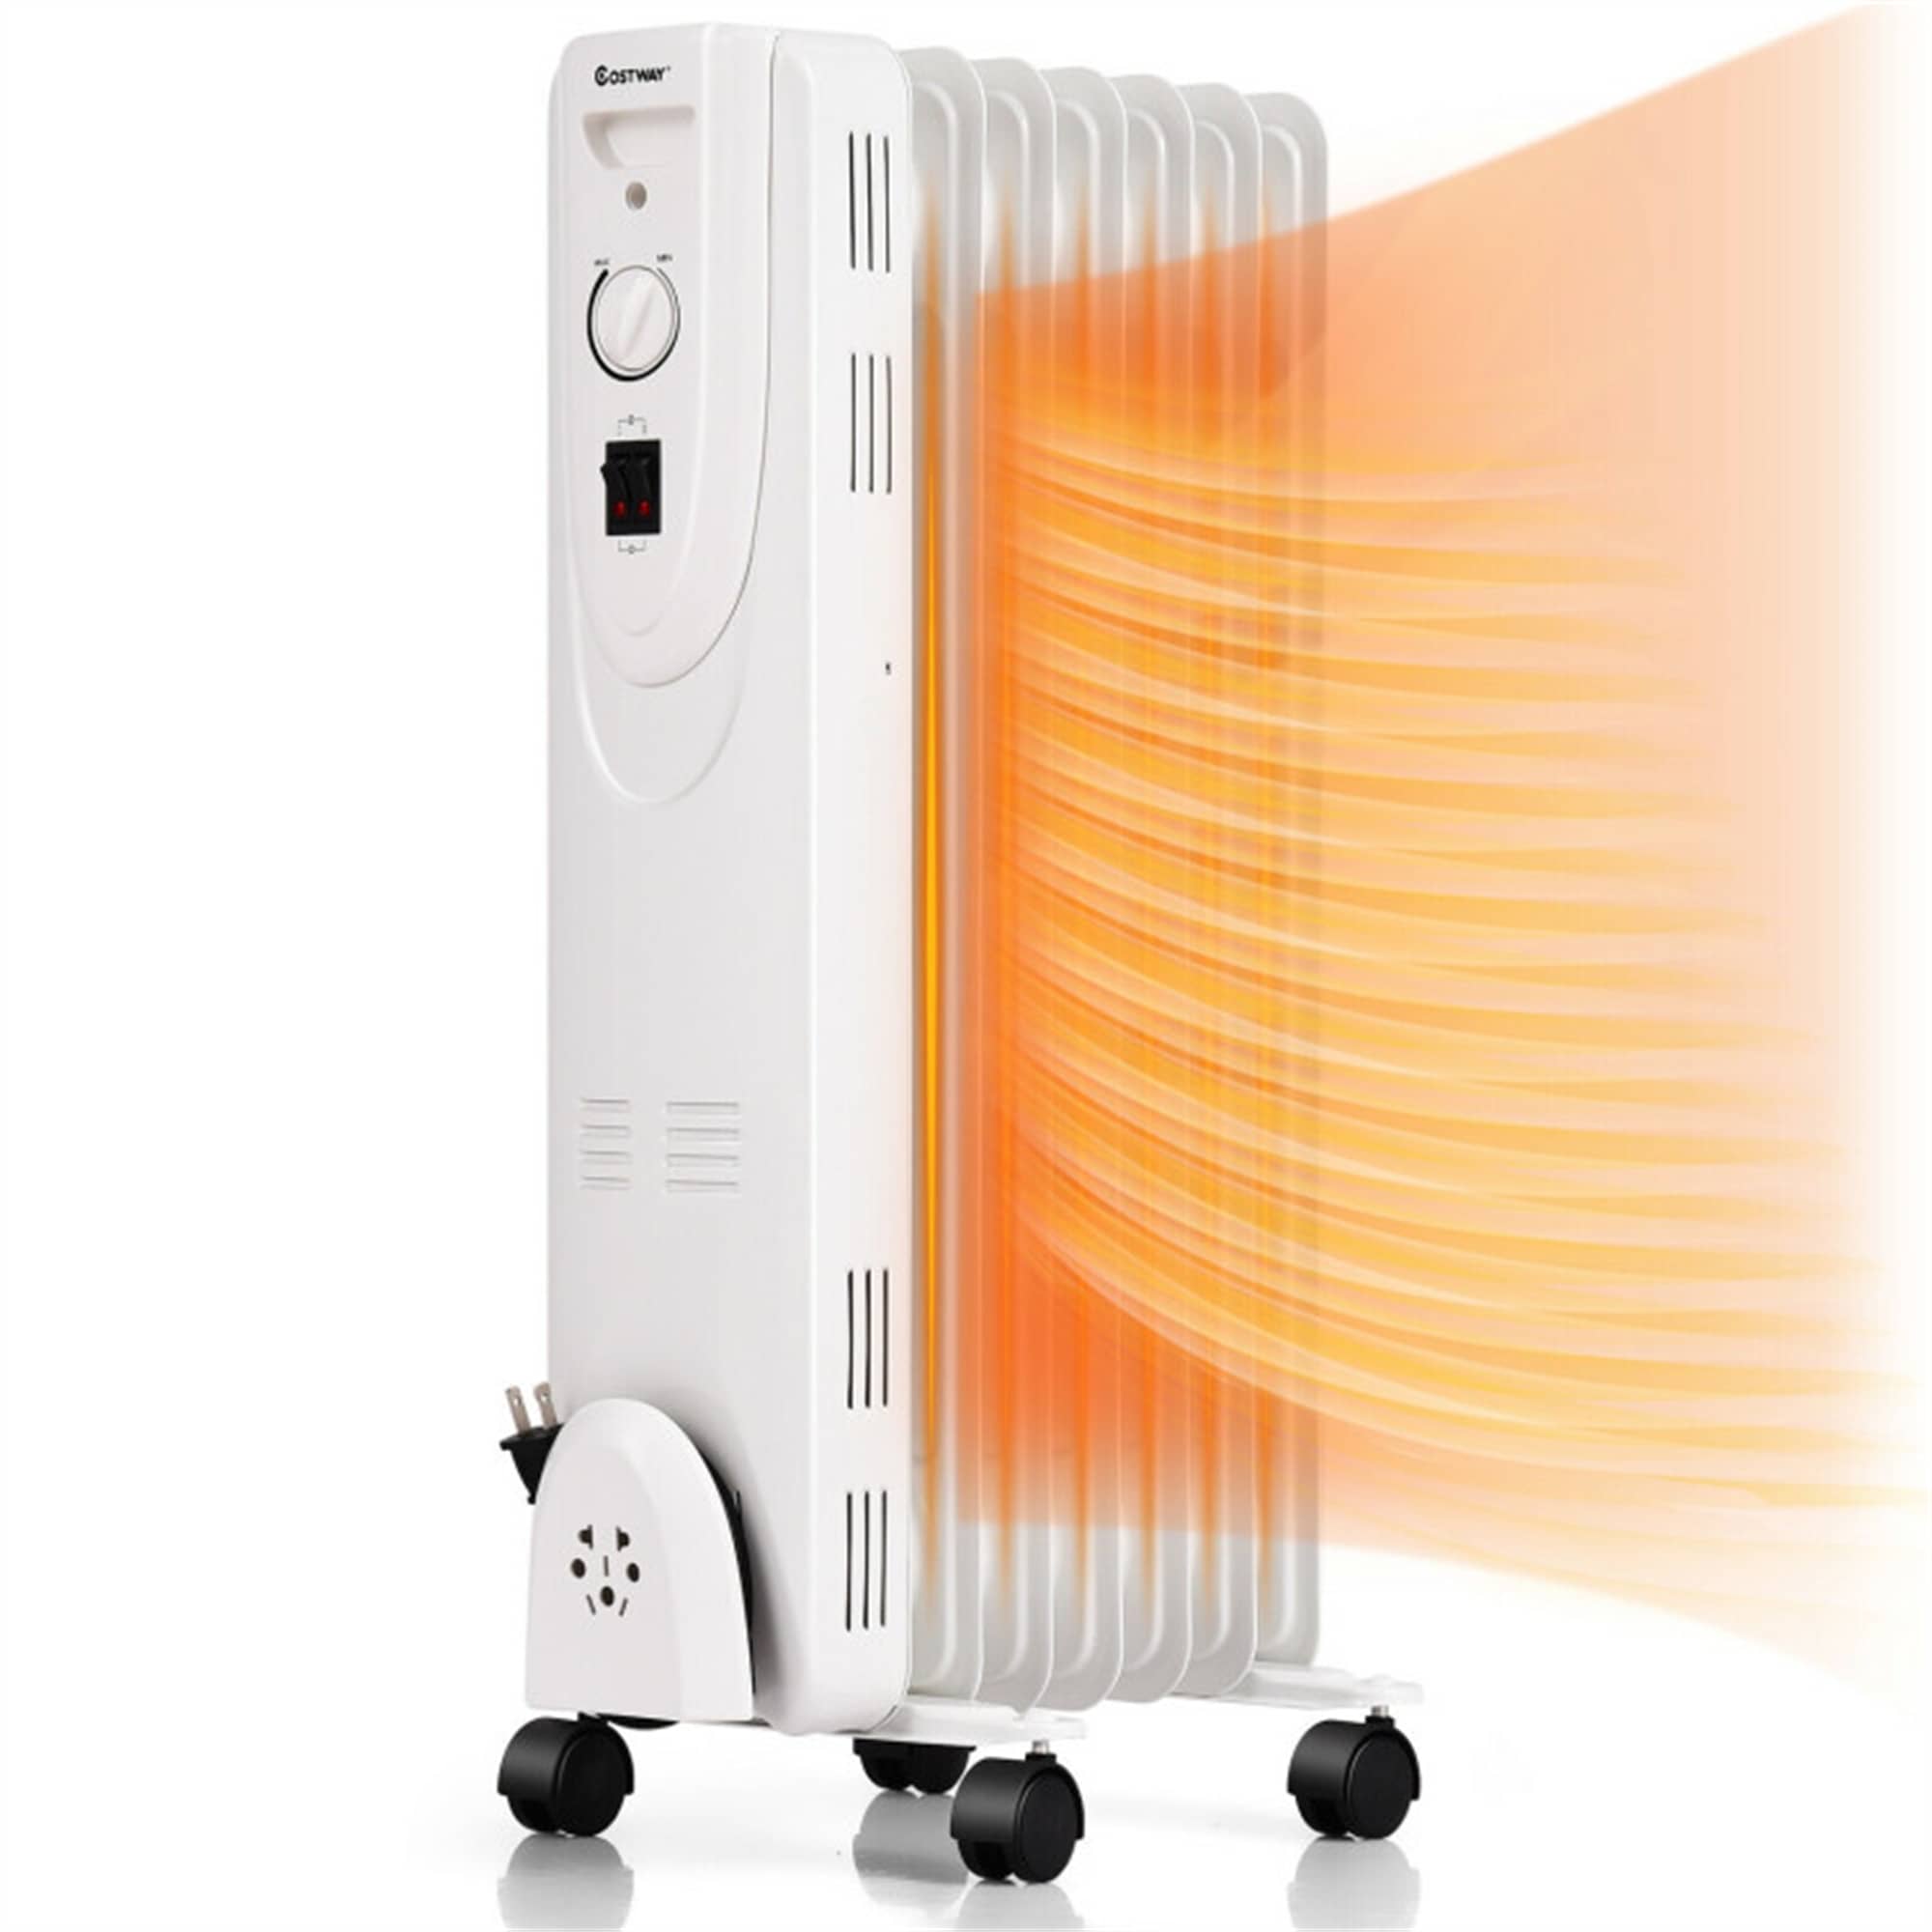 CASAINC 1500W Oil Filled Radiator Heater with Dual Safe Protections